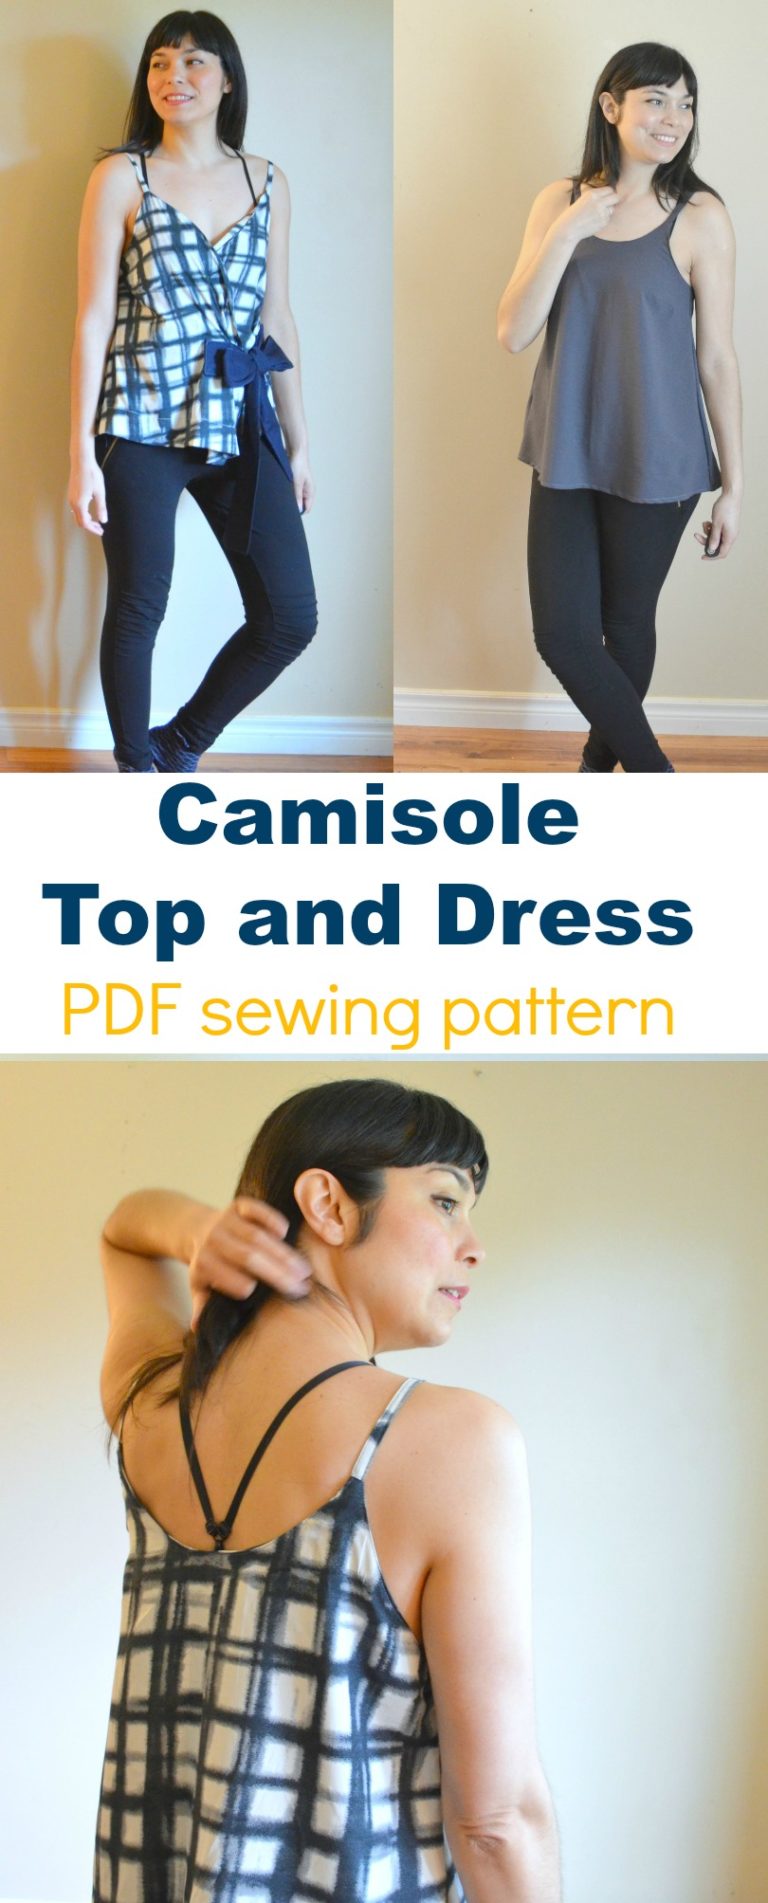 Introducing the Camisole Top and Dress PDF sewing pattern | On the ...